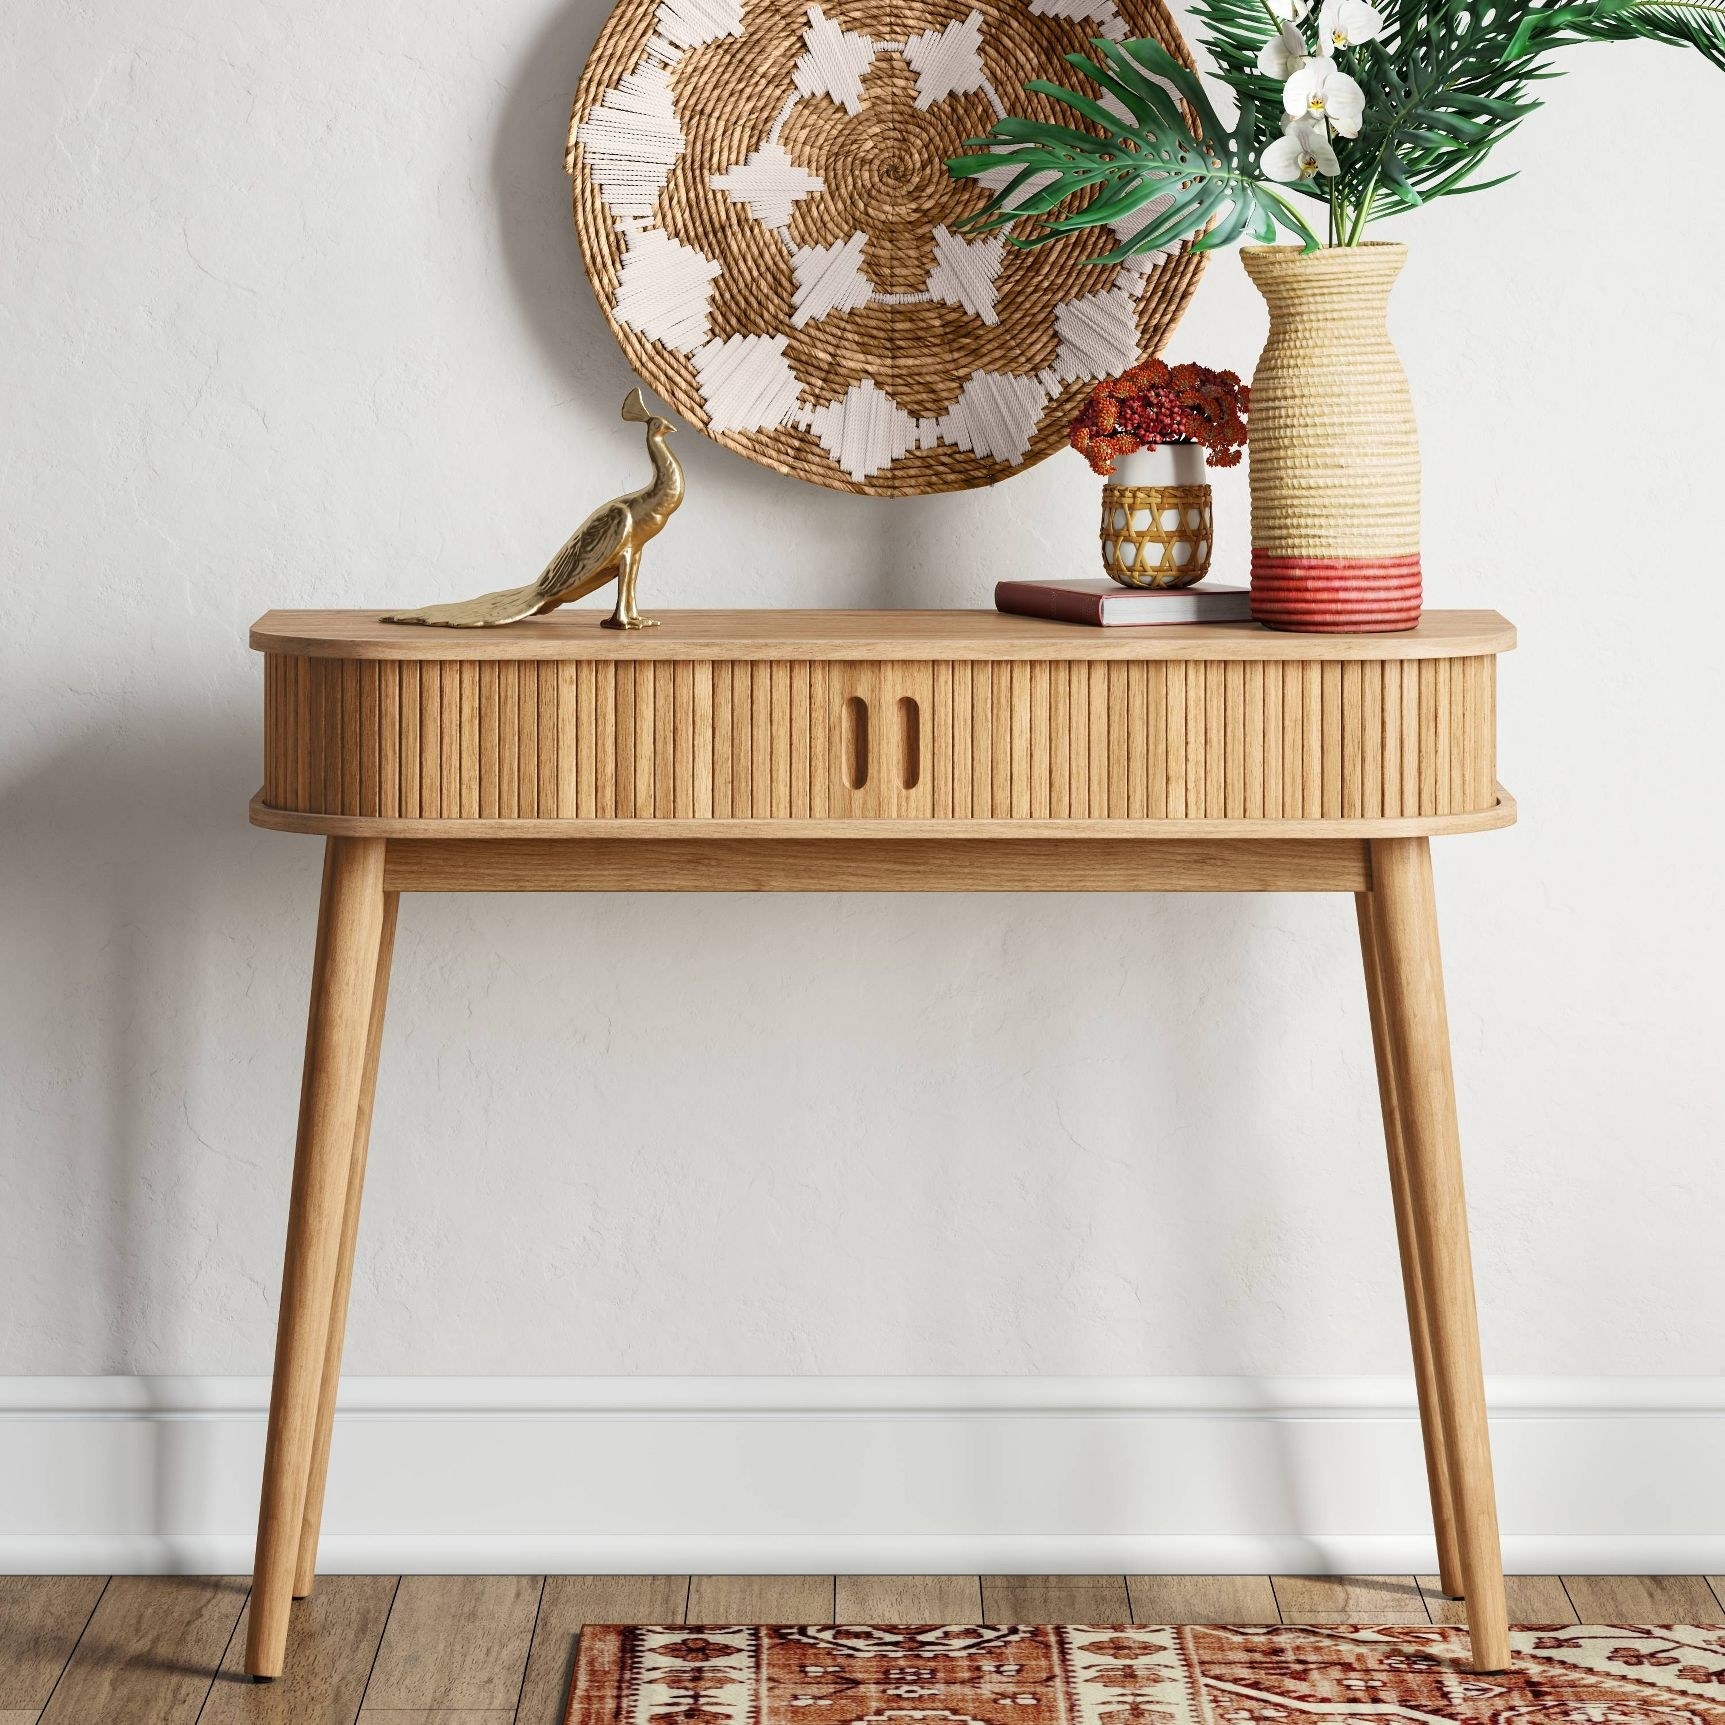 The console table with decor on top